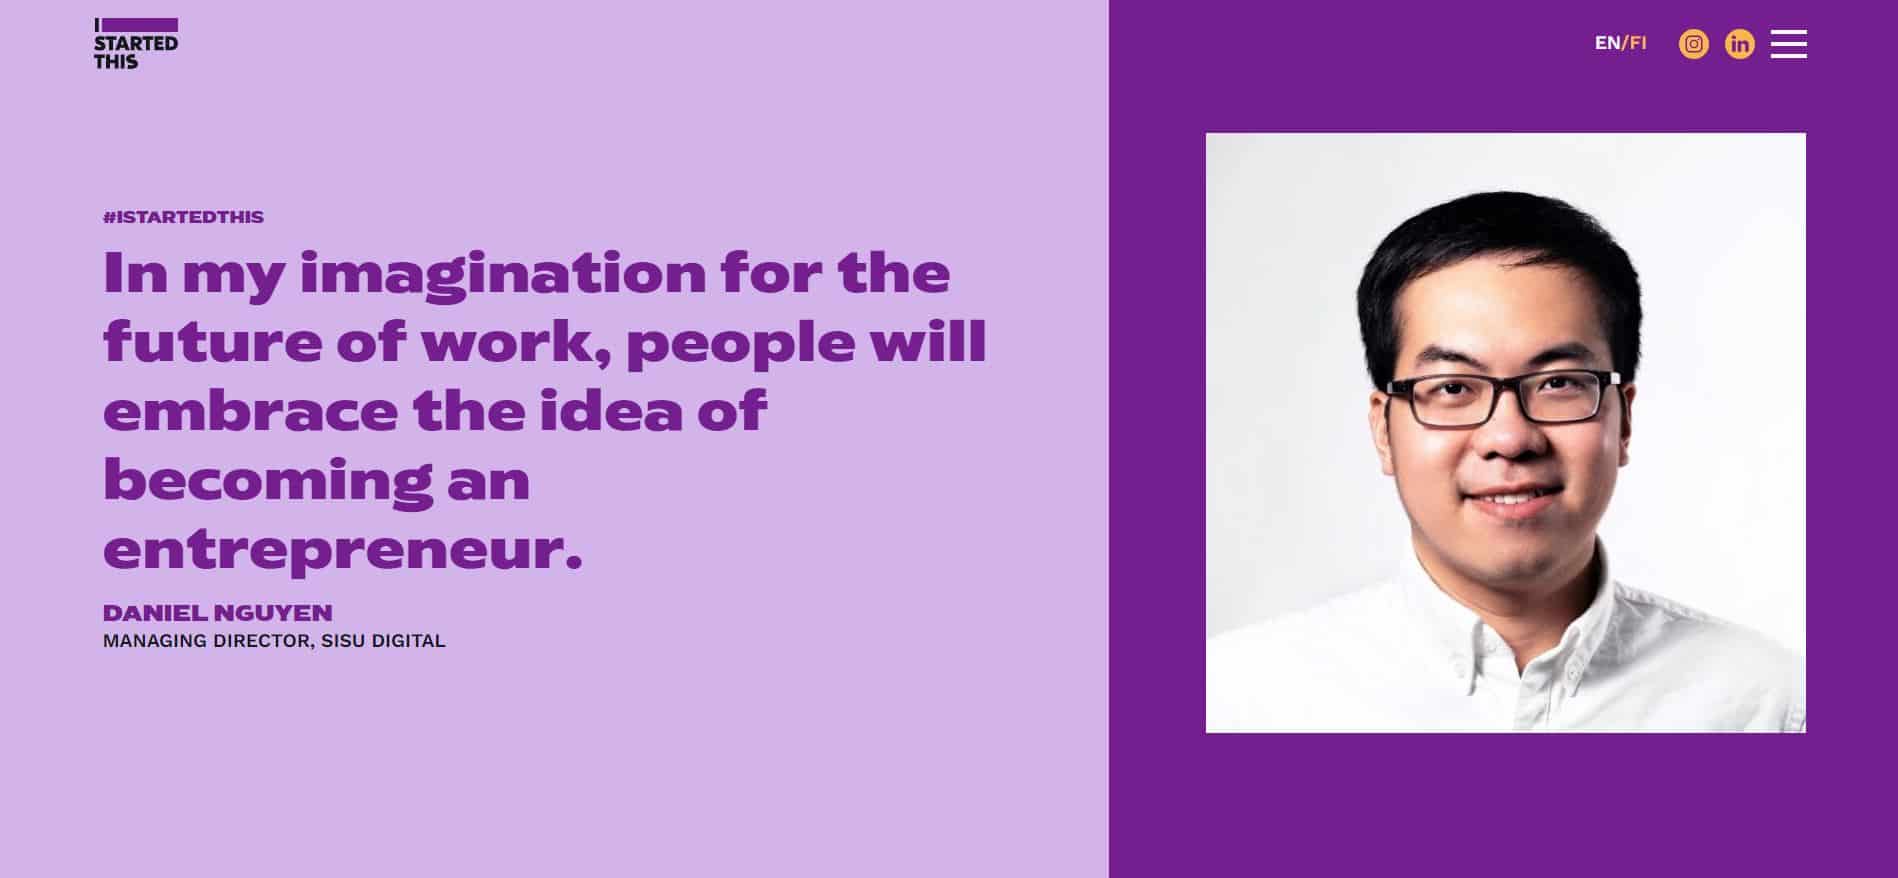 #ISTARTEDTHIS – “In my imagination for the future of work, people will embrace the idea of becoming an entrepreneur.” – DANIEL NGUYEN, MANAGING DIRECTOR, SISU DIGITAL